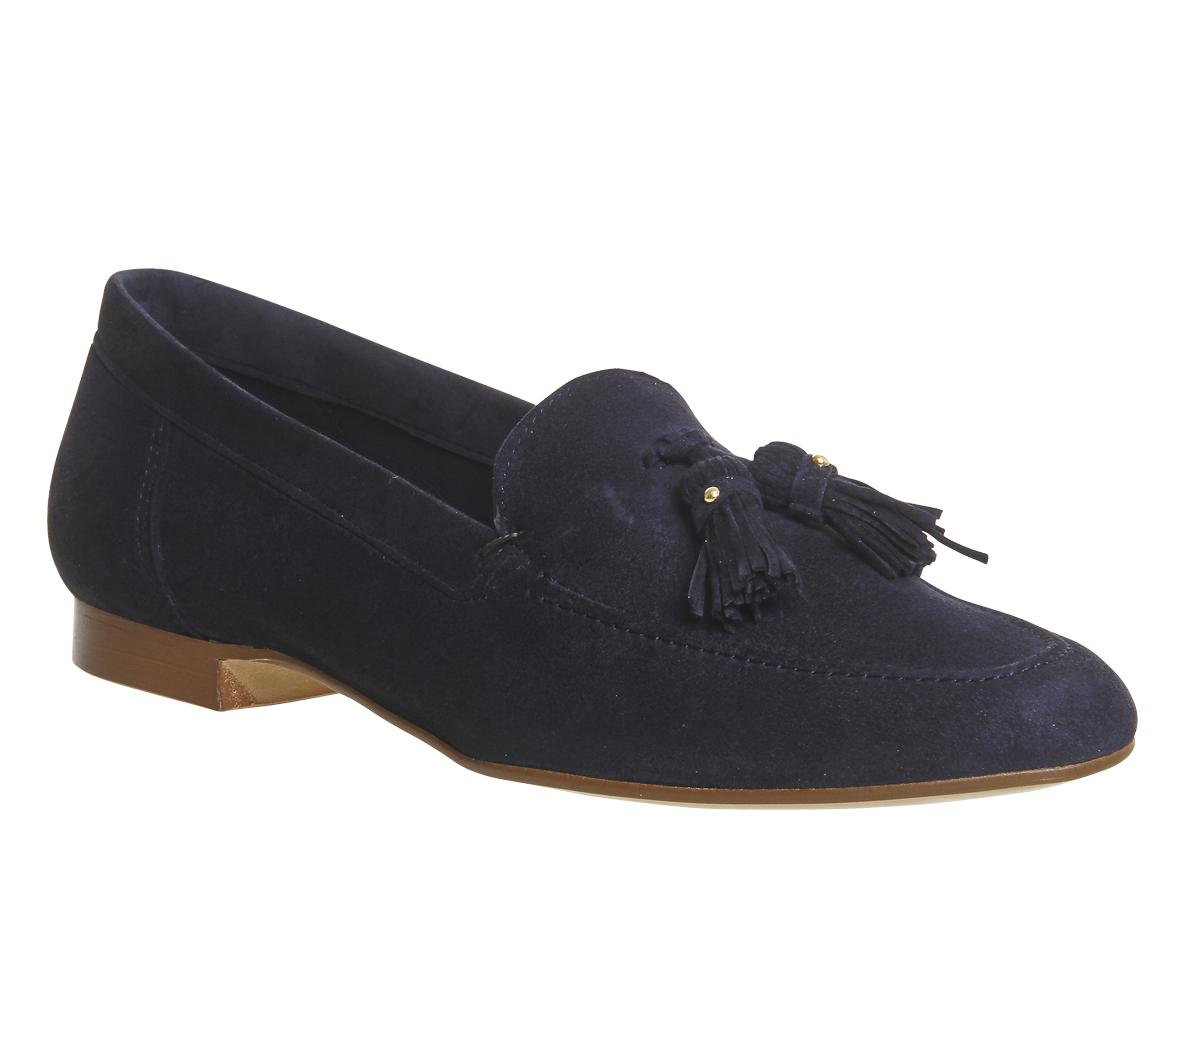 OFFICE Retro Tassel Loafers Navy Suede - Flat Shoes for Women